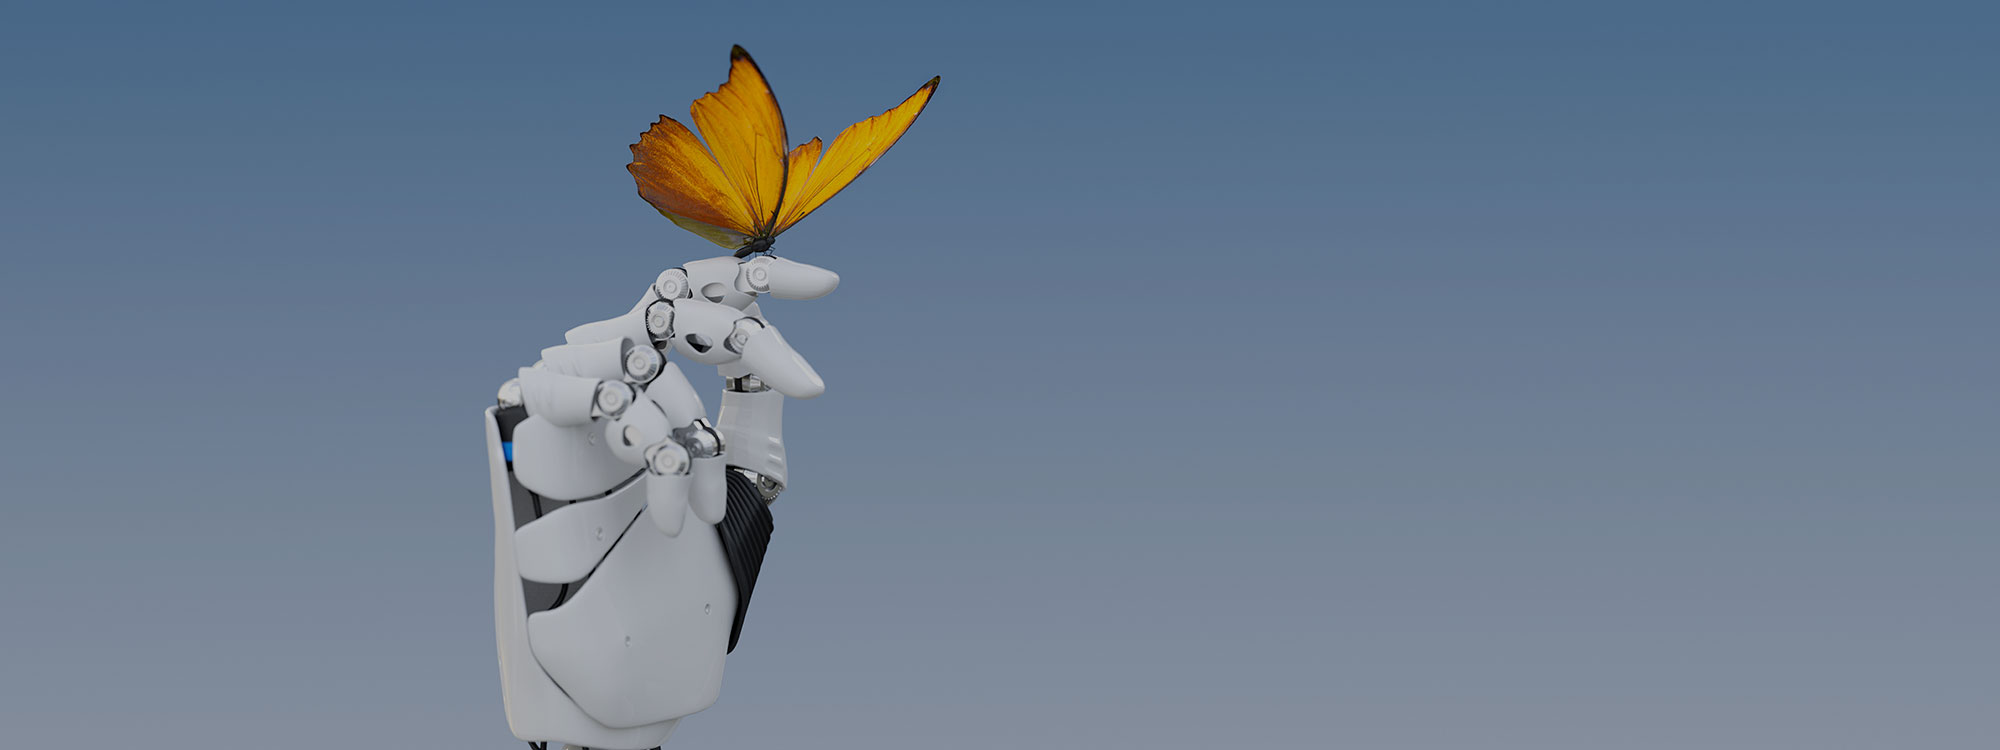 Robot hand gently holding butterfly